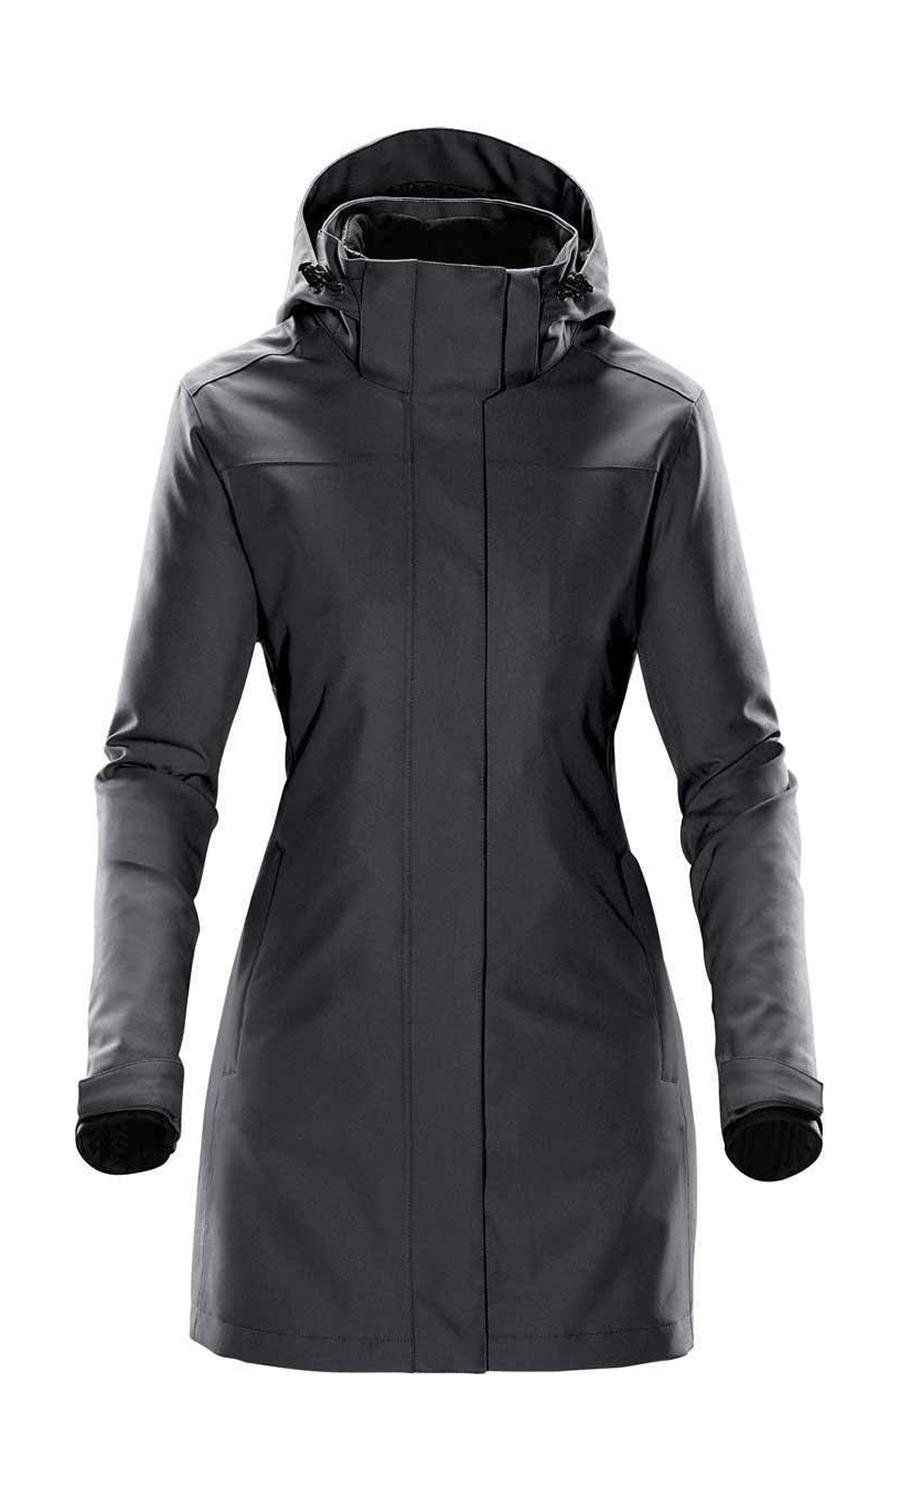  Womens Avalanche System Jacket in Farbe Charcoal Twill